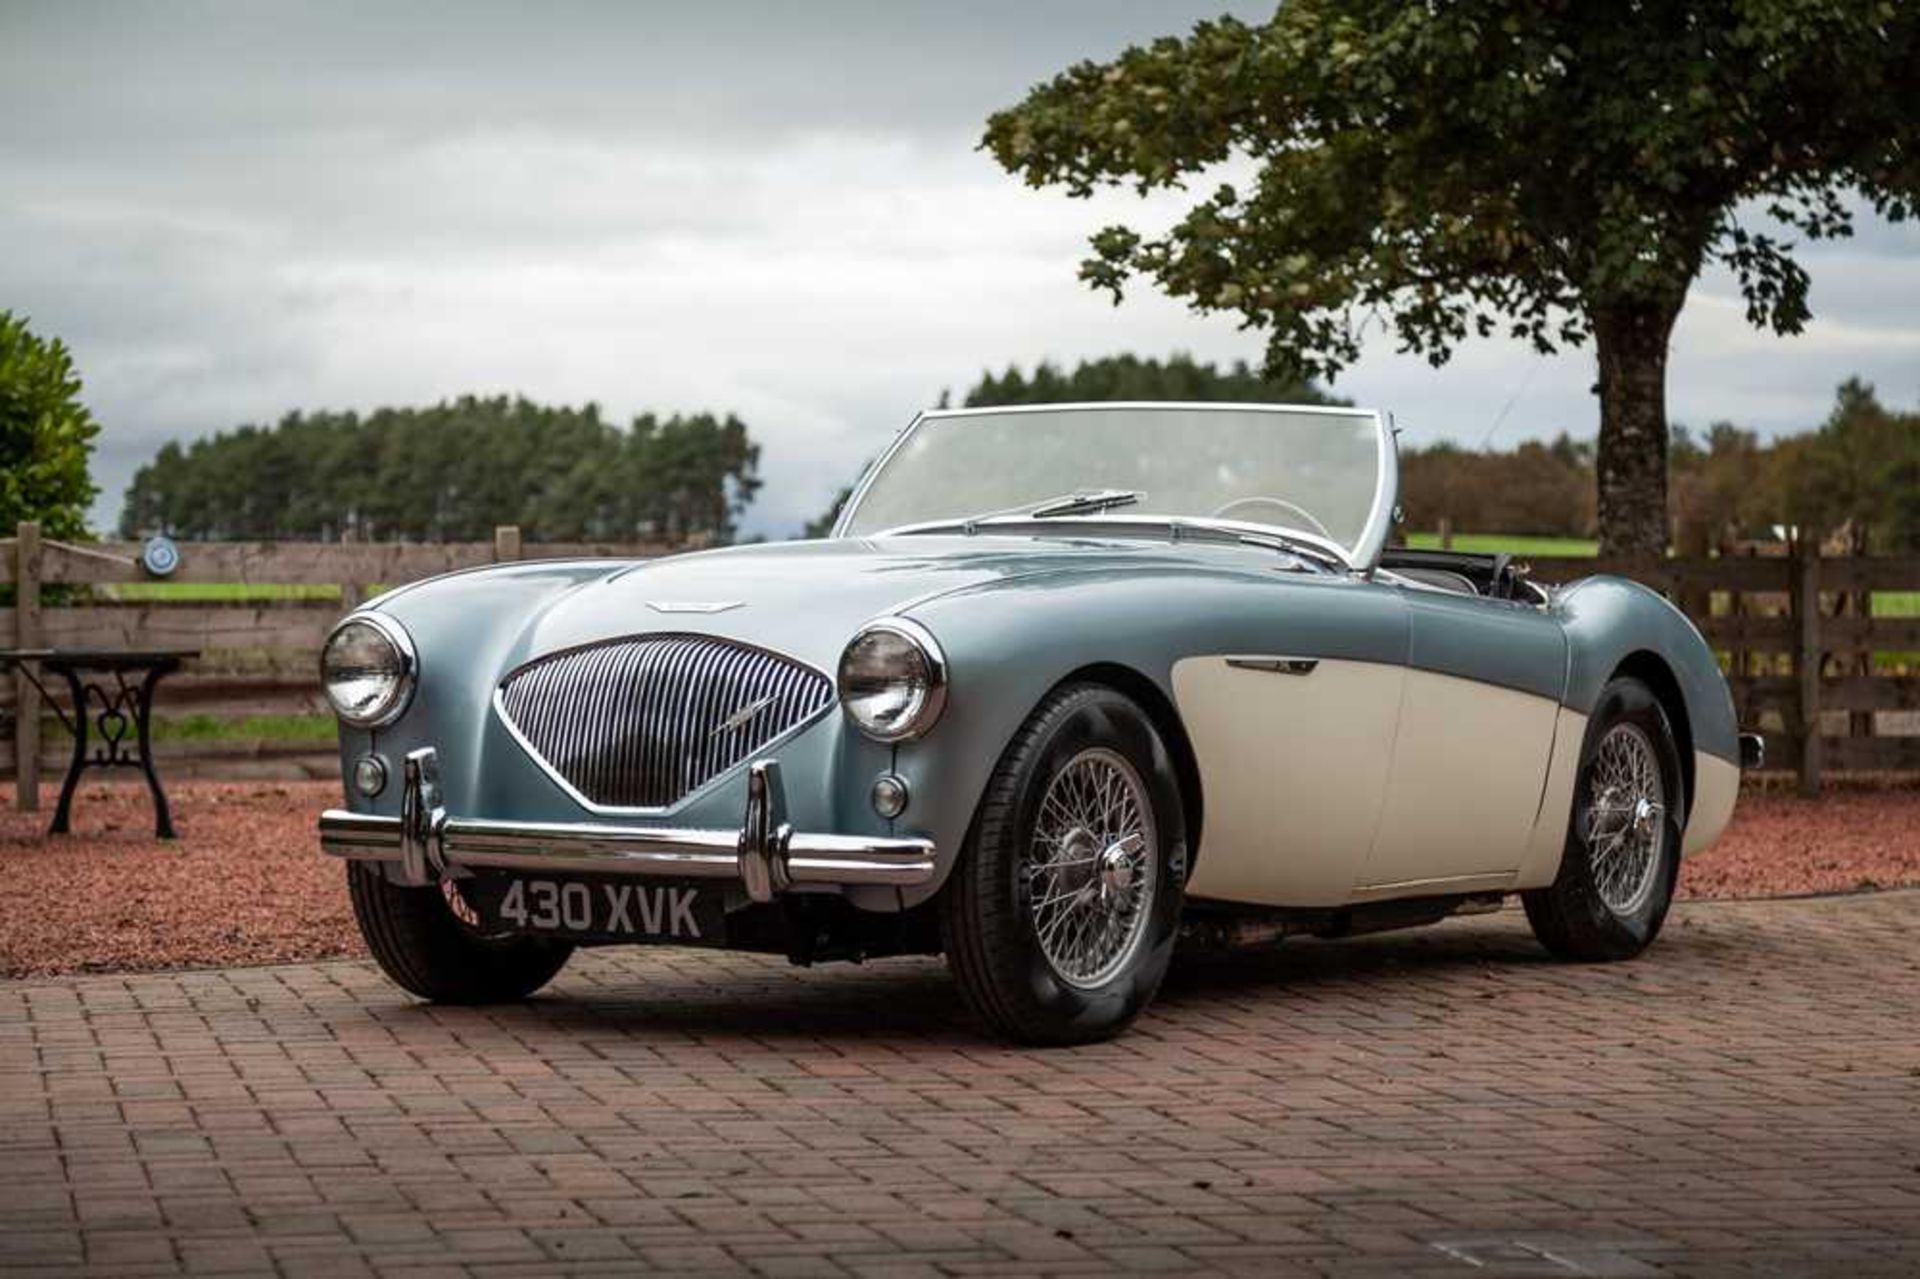 1955 Austin-Healey 100/4 Subtly Upgraded with 5-Speed Transmission and Front Disc Brakes